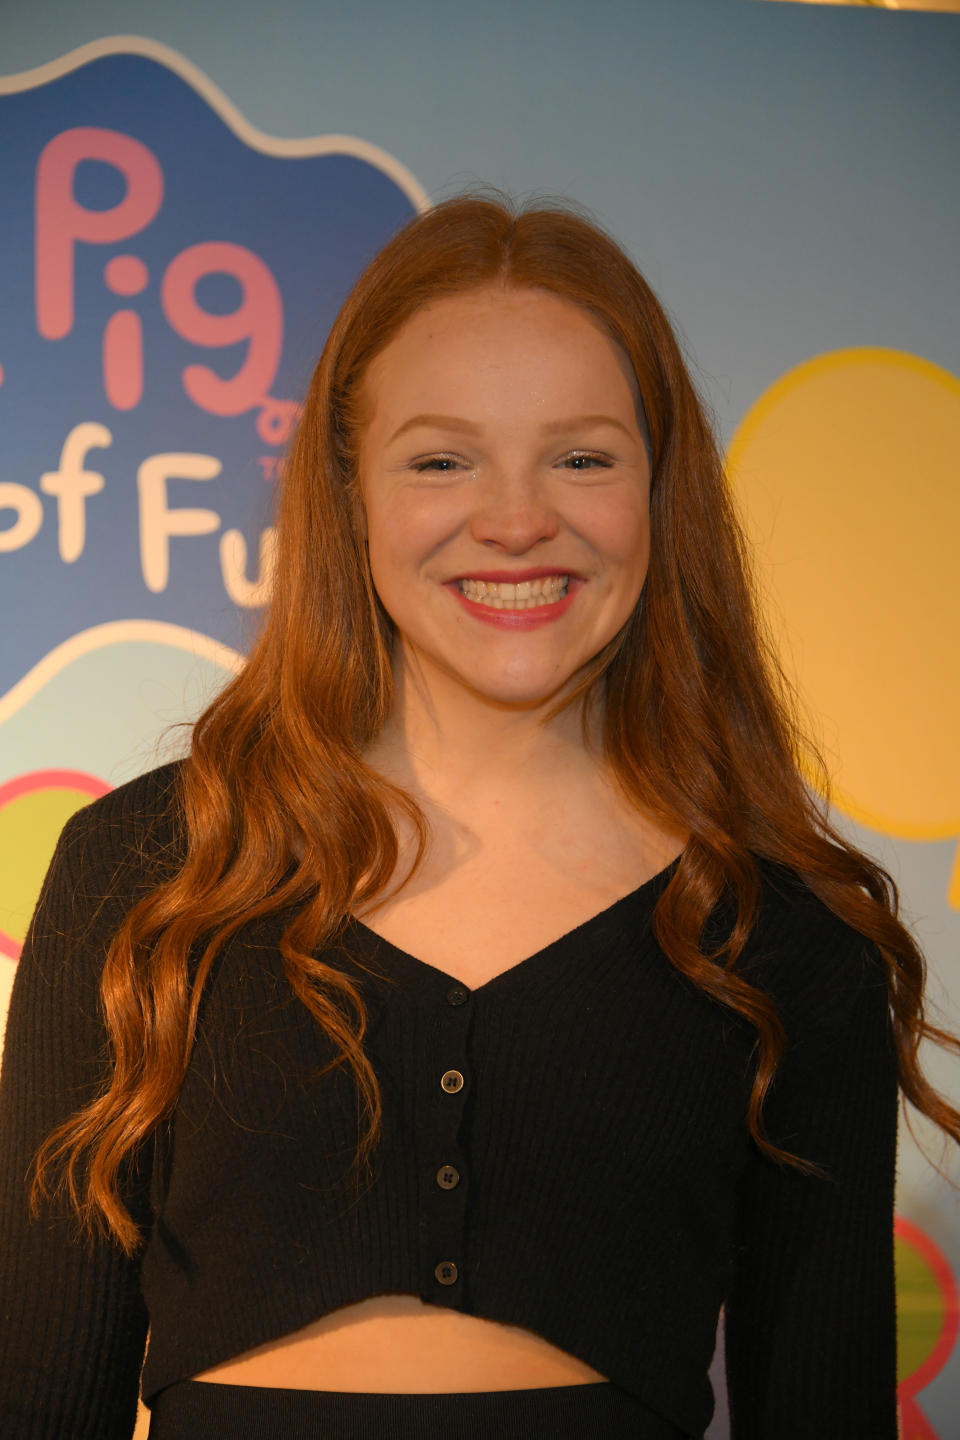 Harley Bird attends a gala screening of "Peppa Pig: Festival Of Fun" at Vue Leicester Square on March 17, 2019 in London, England. (Photo by David M. Benett/Dave Benett/Getty Images)